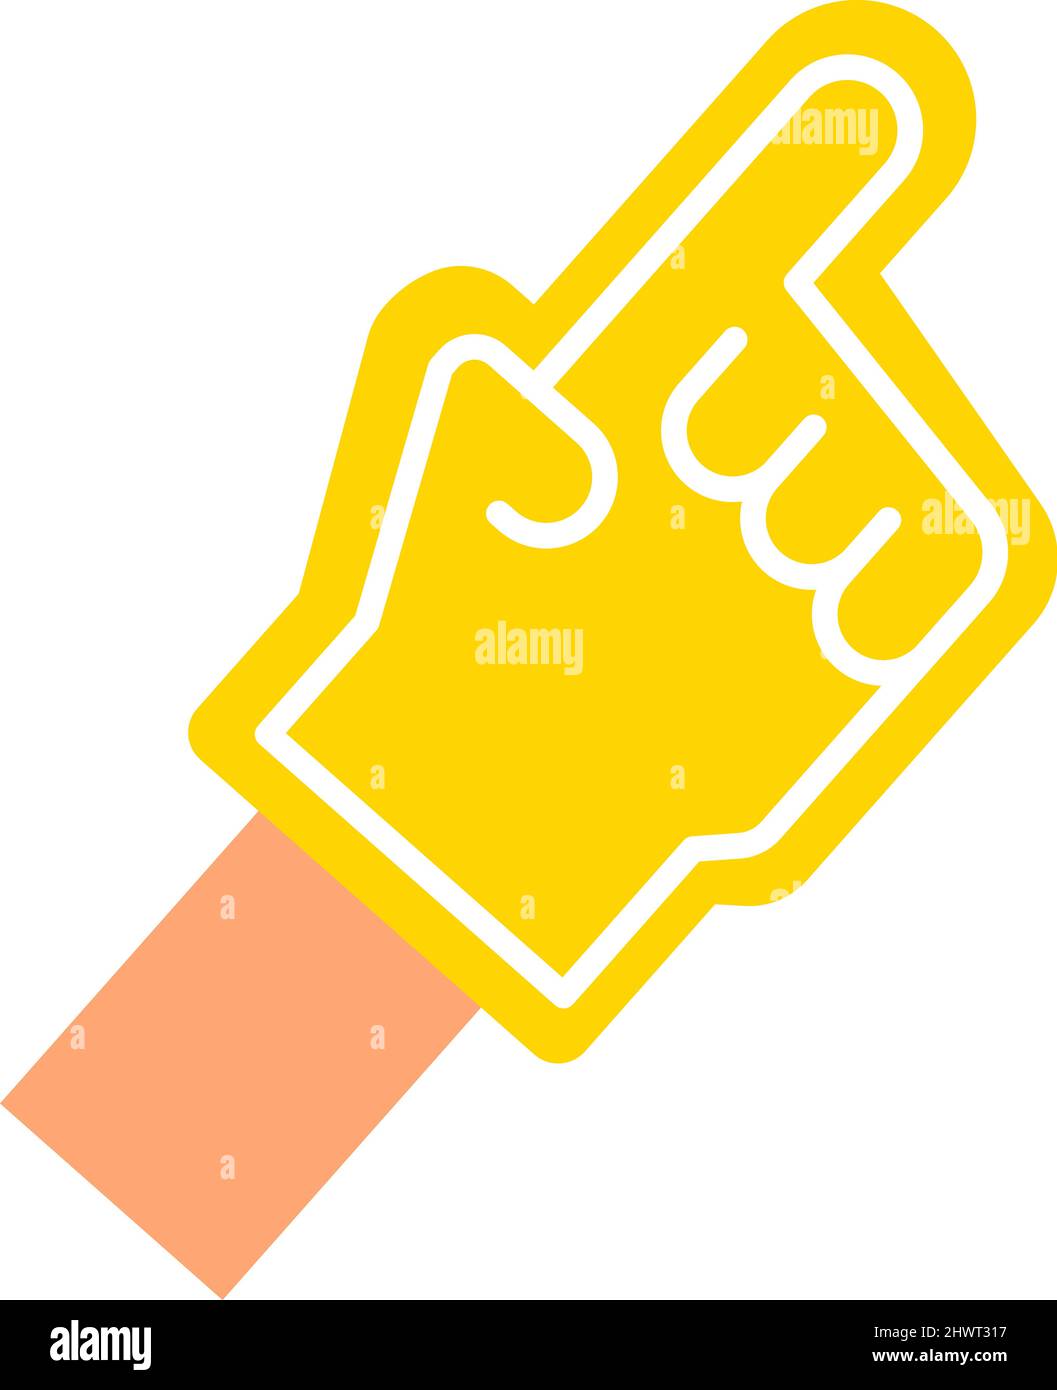 Number one fan foam hand with raised index finger icon vector. Sport team cheer and support with glove Stock Vector